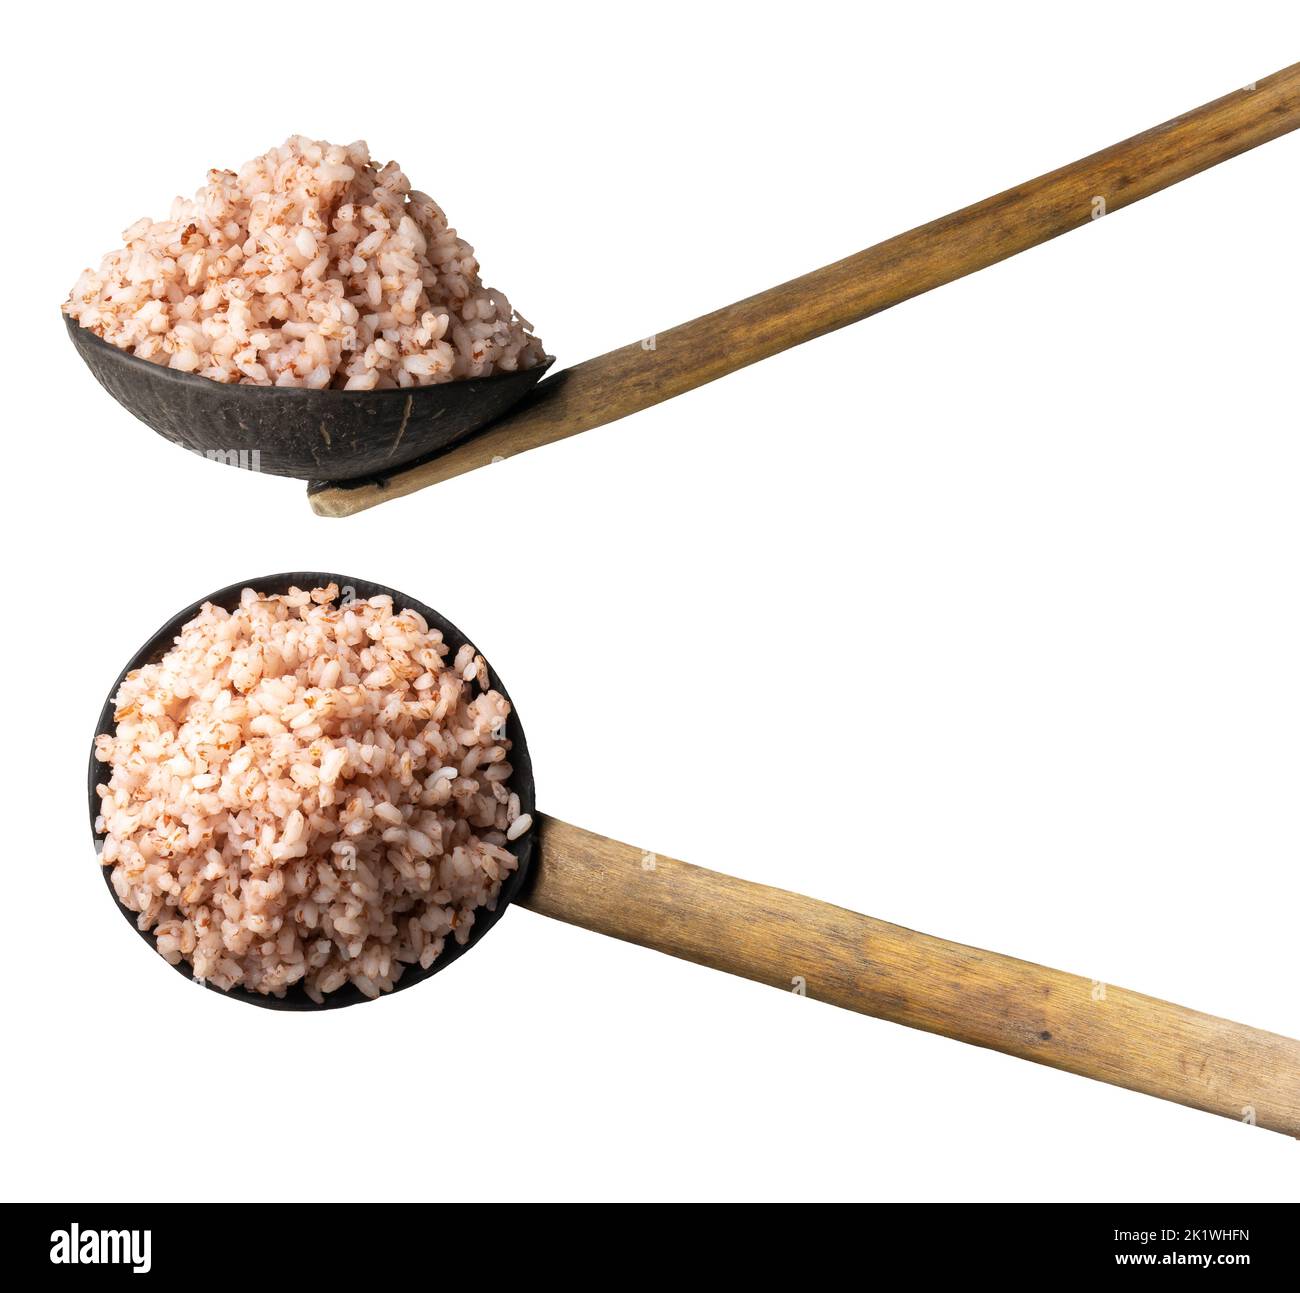 coconut shell spoon full of cooked whole grain brown rice in different angles, isolated on white background, collection Stock Photo